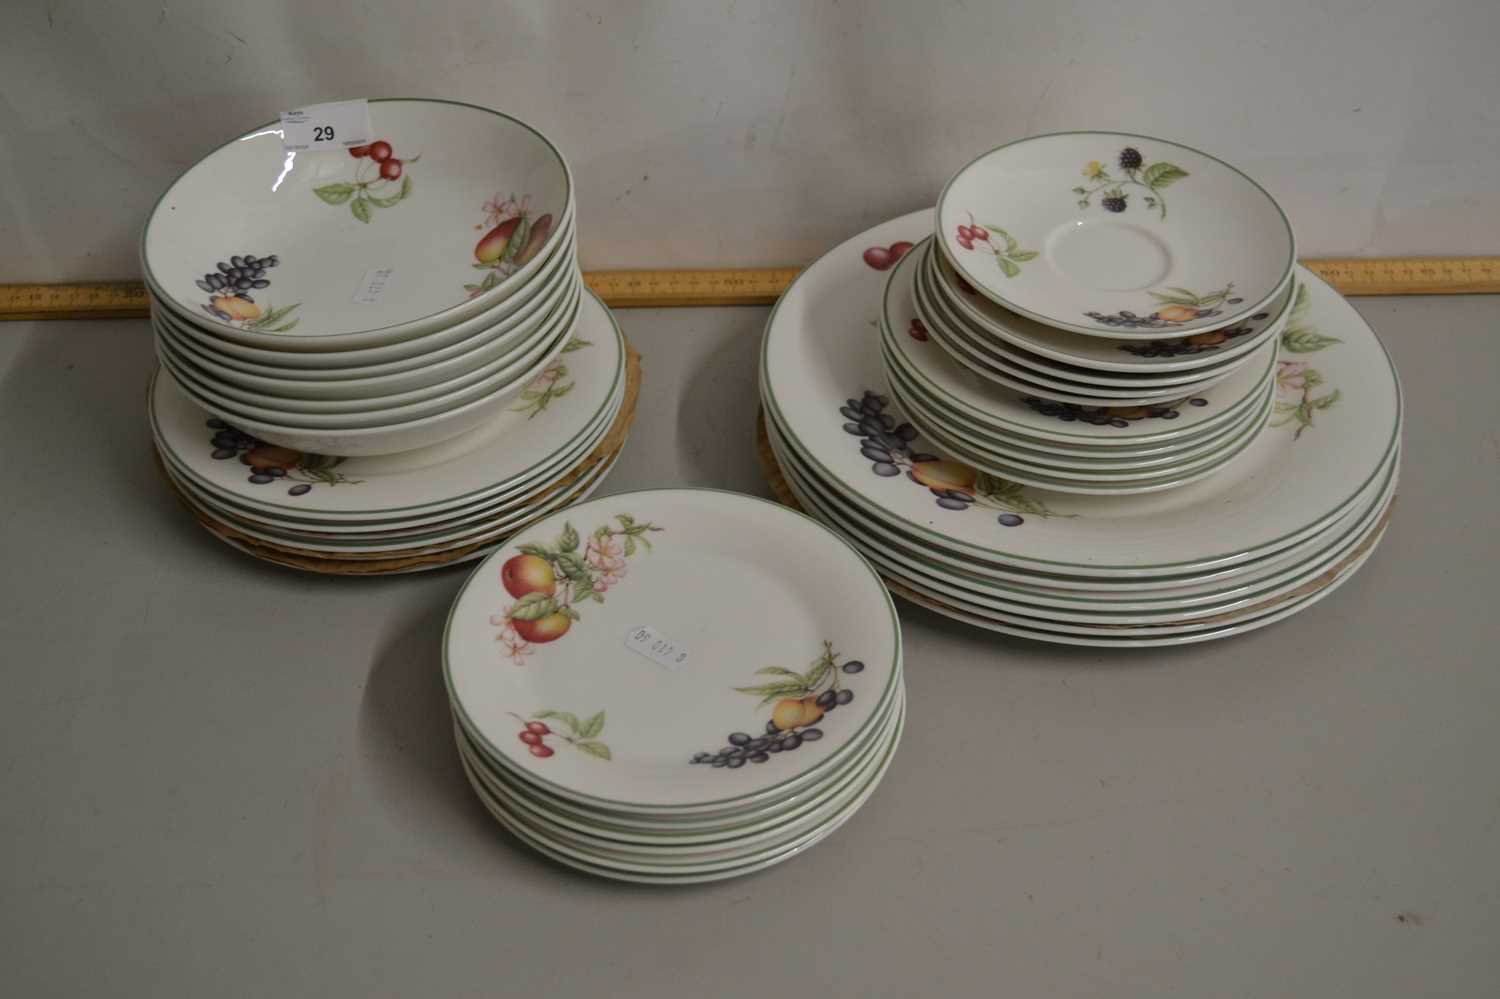 Quantity of St Michael Ashbury table wares